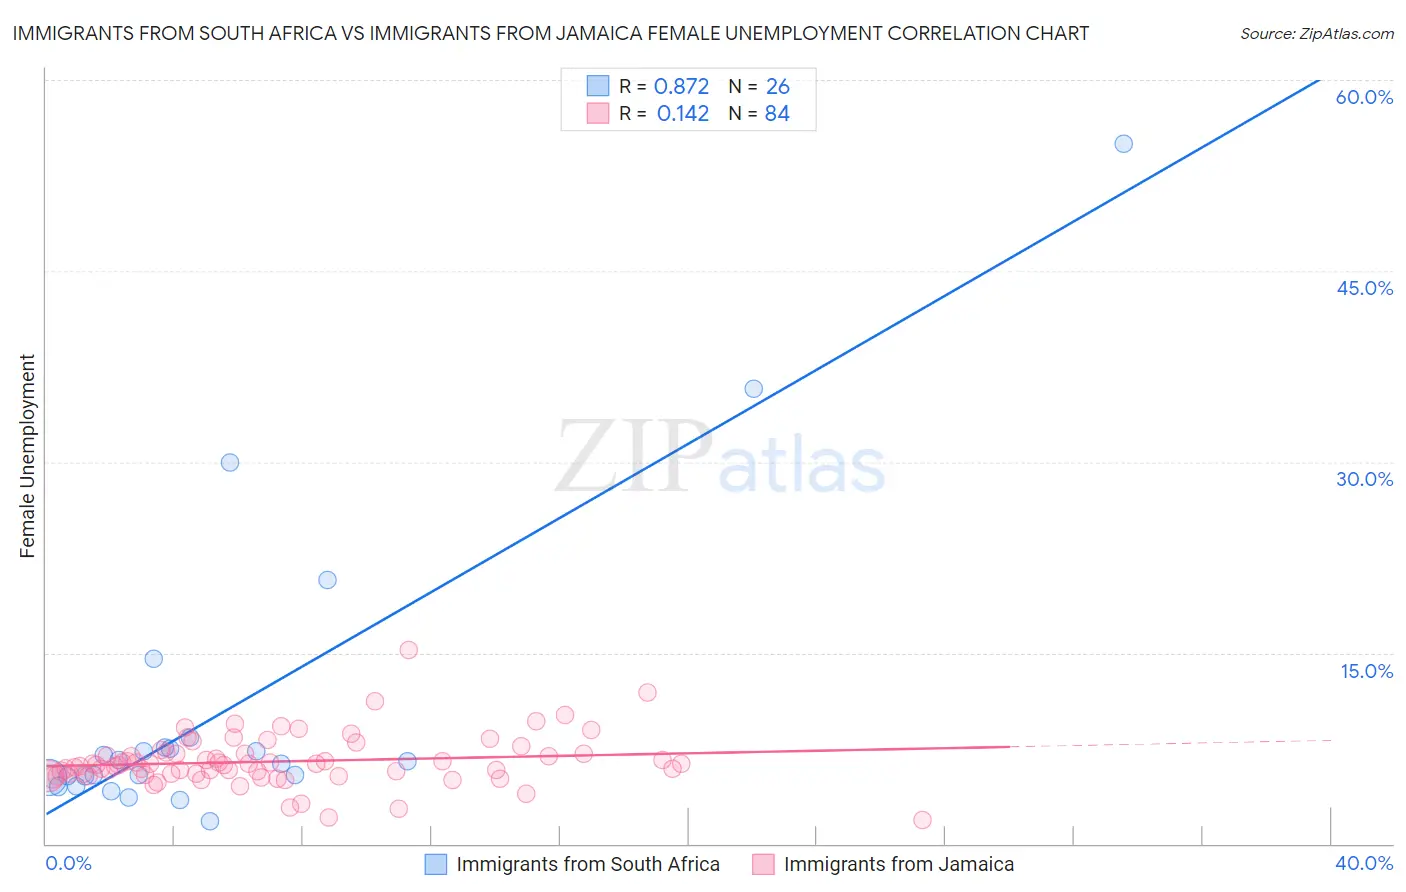 Immigrants from South Africa vs Immigrants from Jamaica Female Unemployment